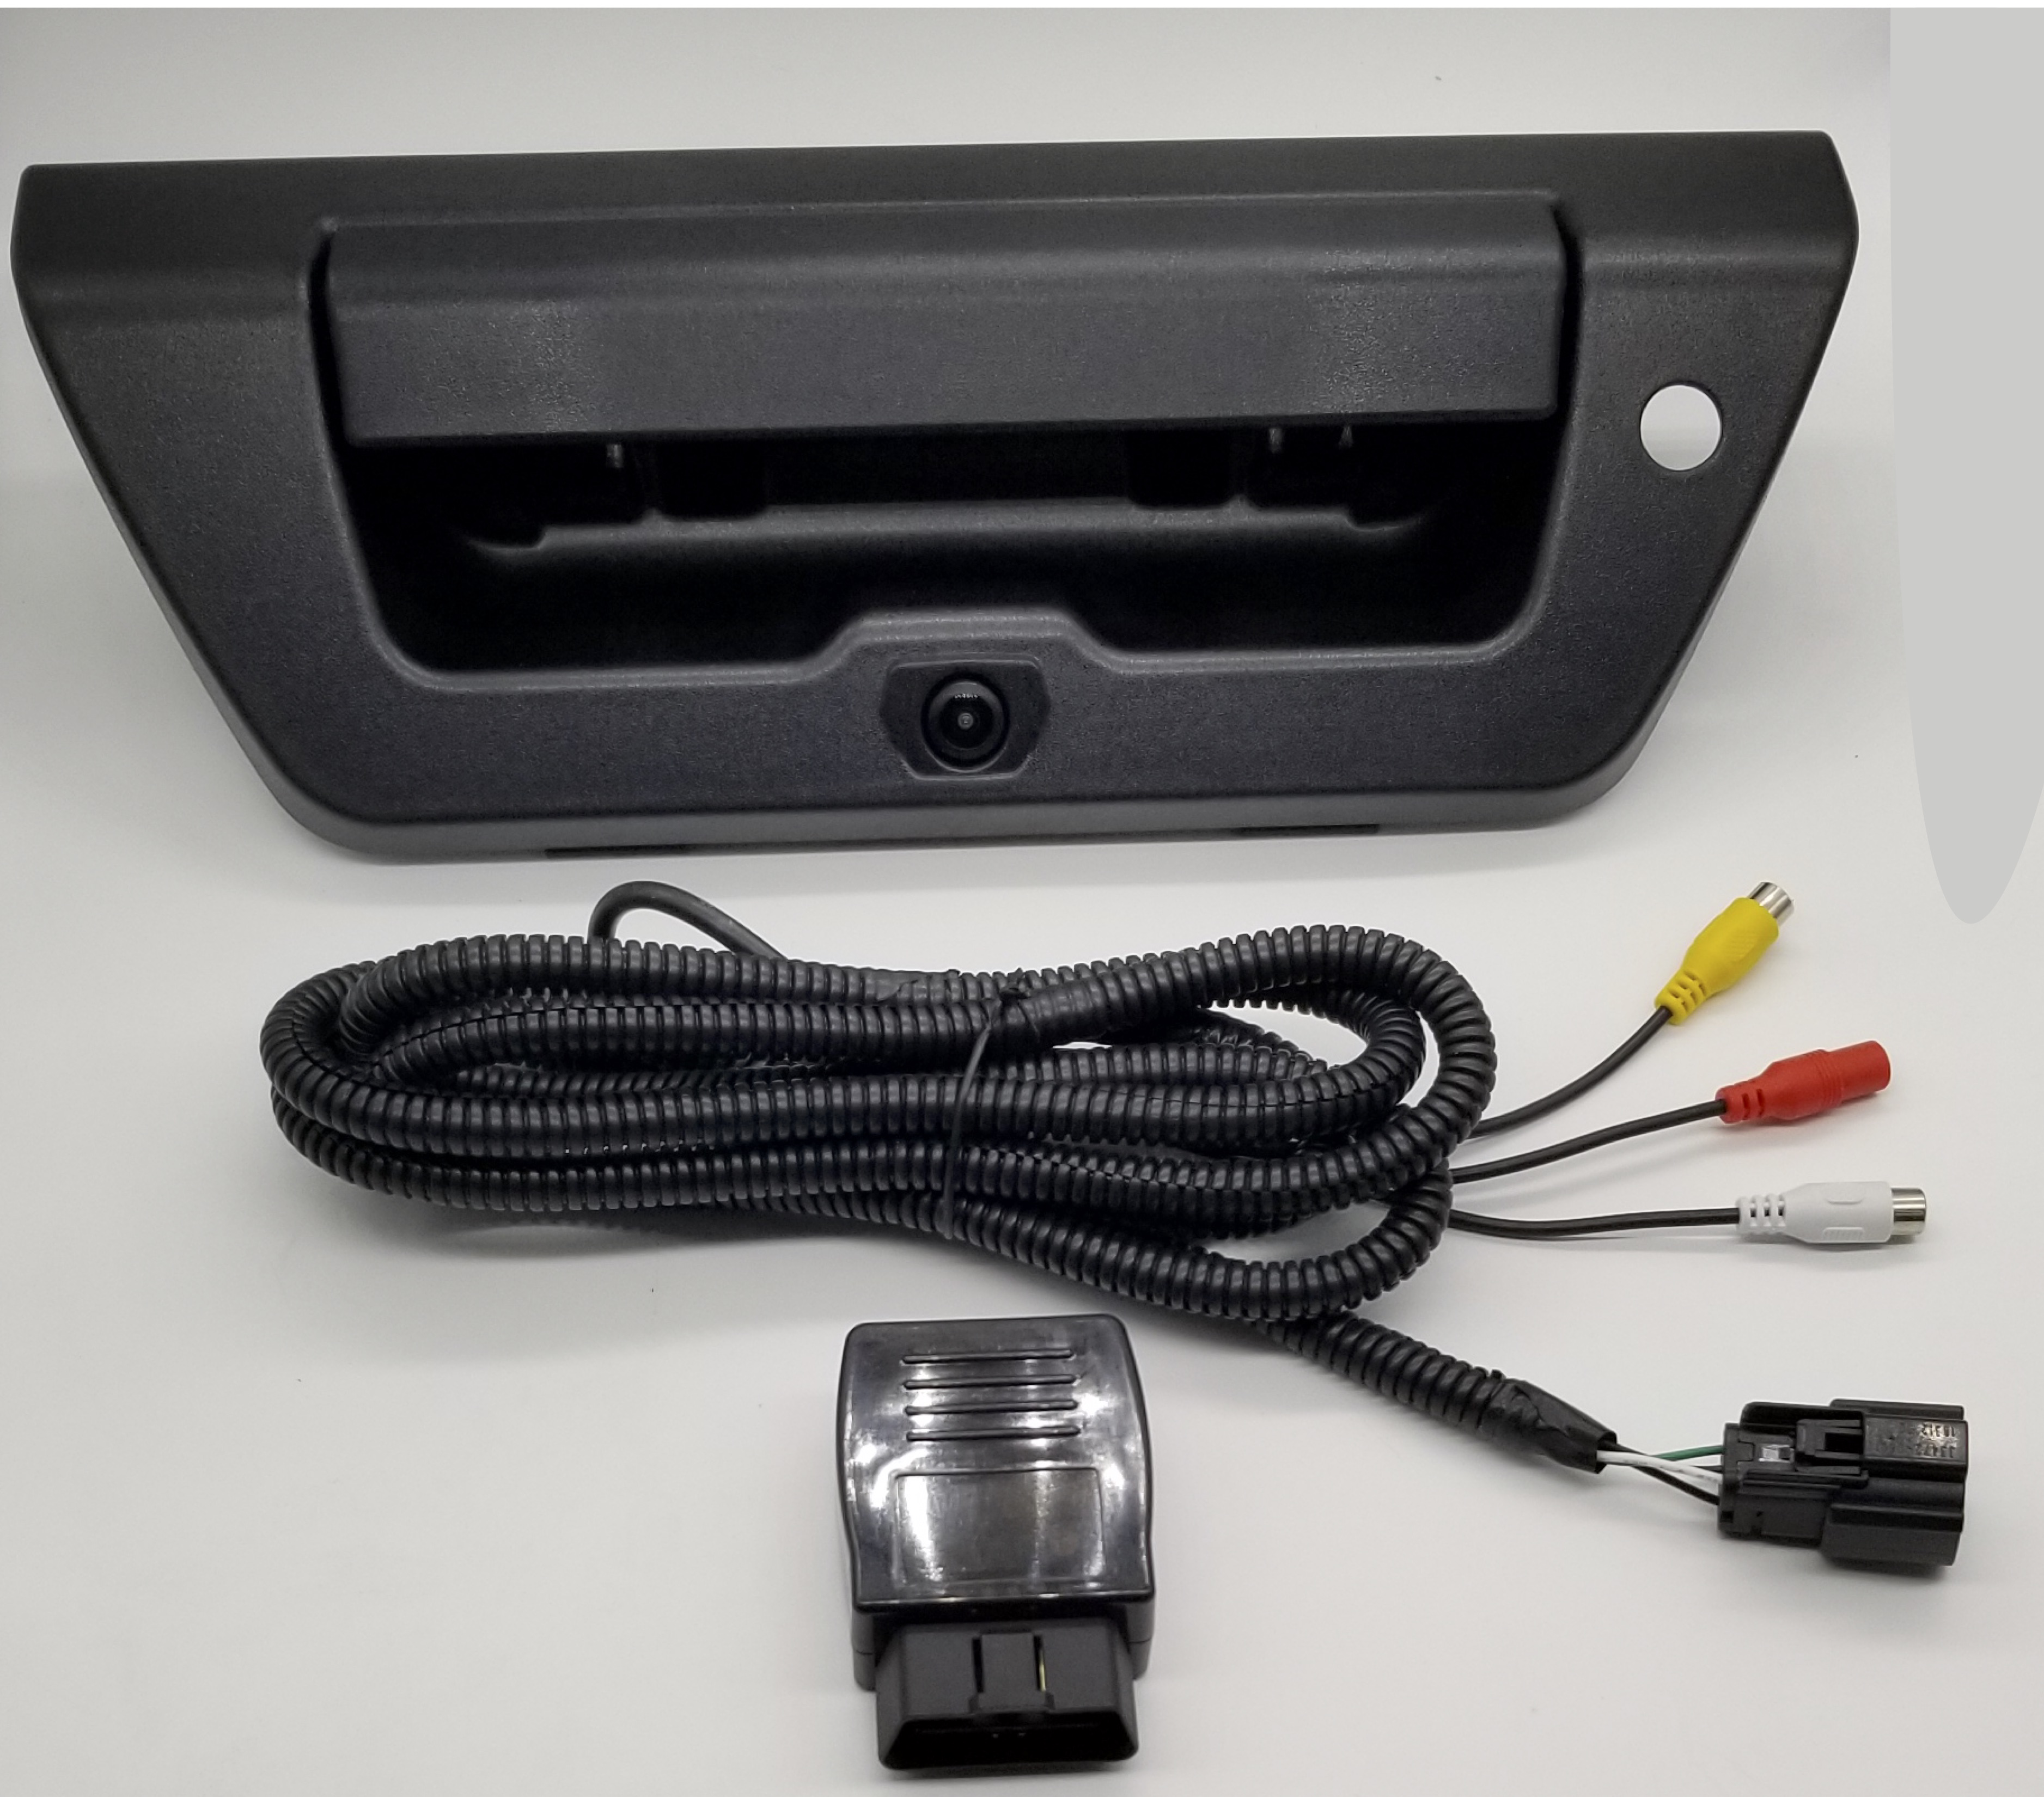 F-150-DIY Package Content